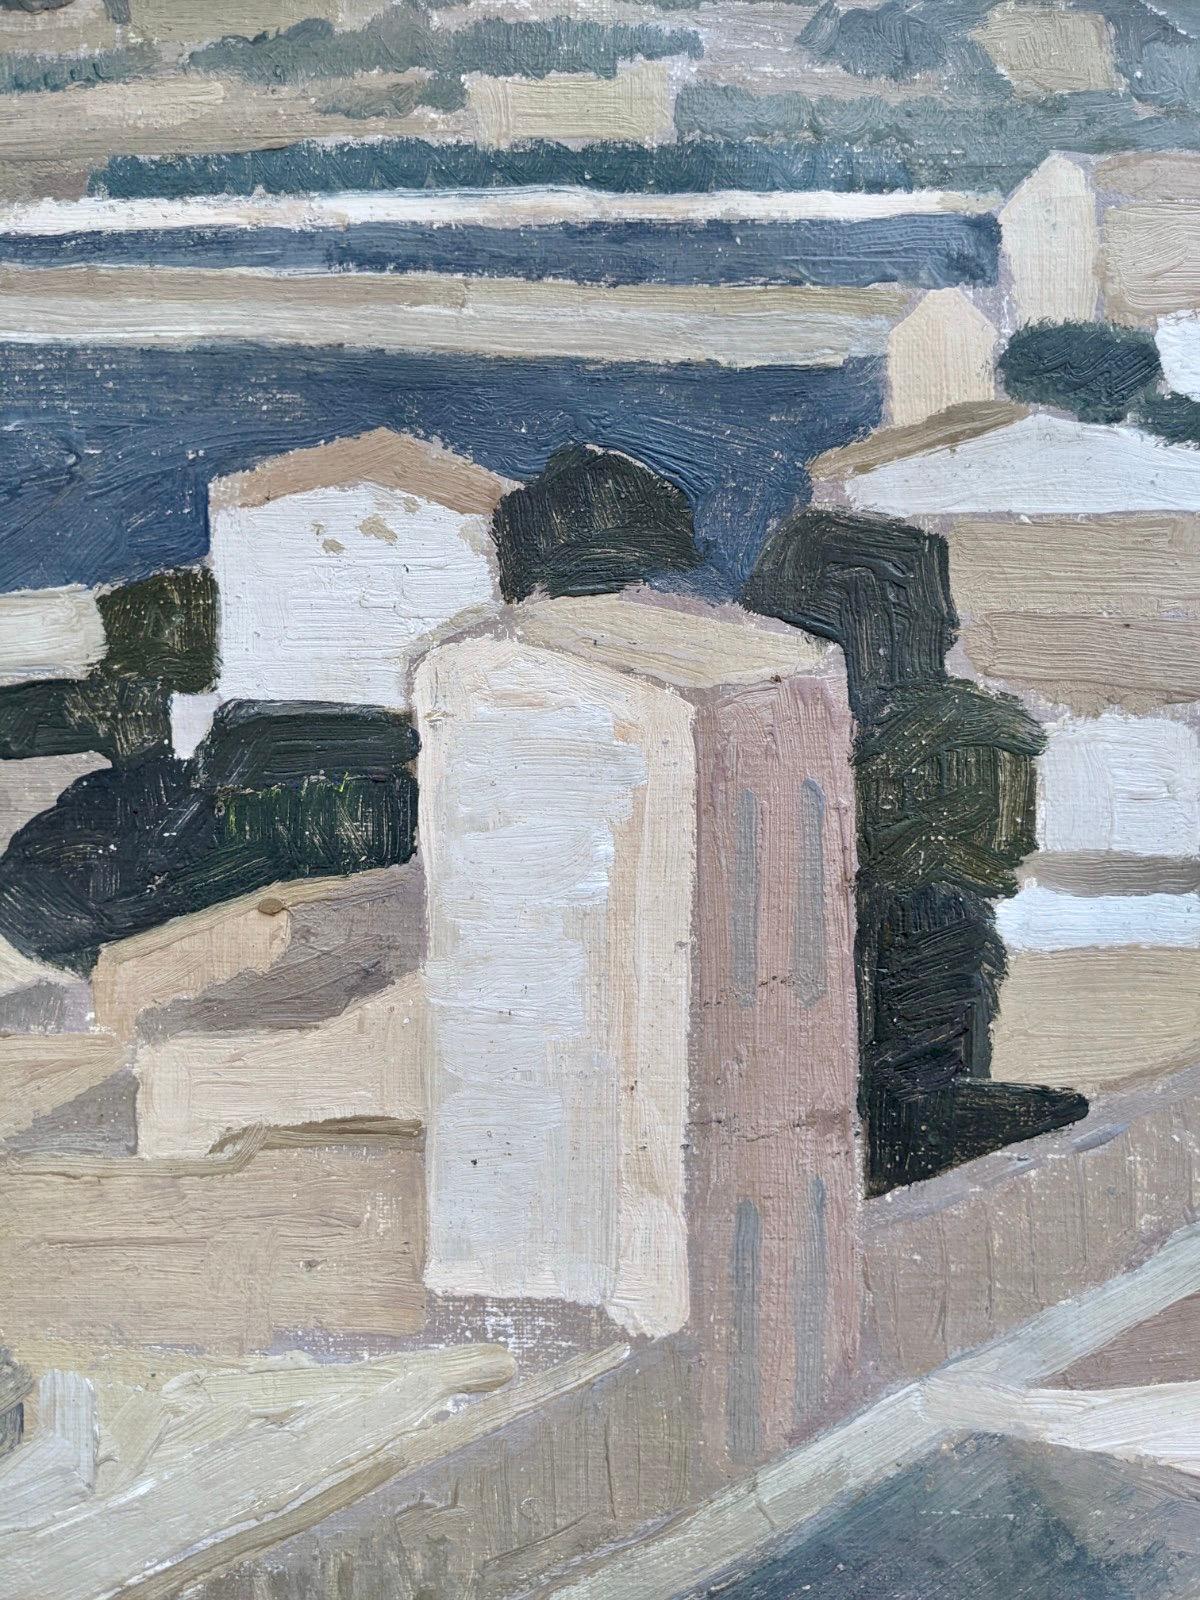 A small but outstanding mid 20th century oil painting of a cityscape, painted in an abstract manner.

The artist has skilfully abstracted the city containing  buildings, foliage and a river down through the use of contrasting blocks of